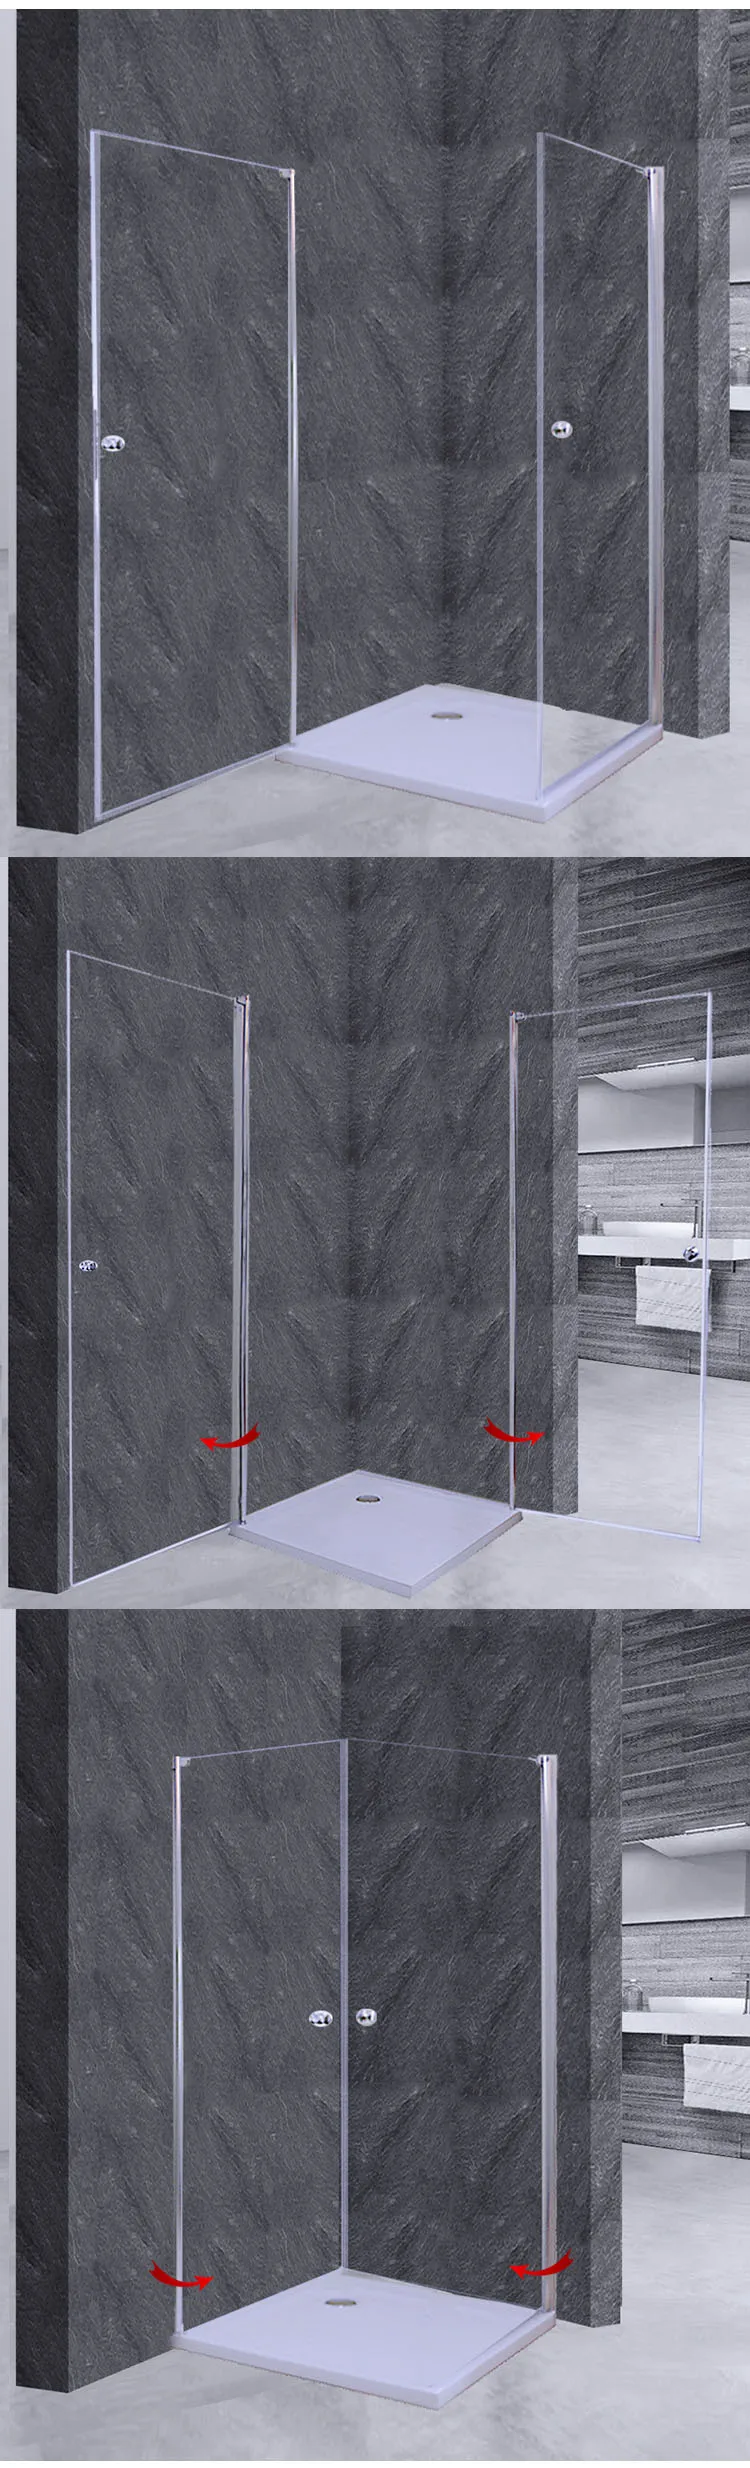 KEZE  180 degree pivot  adopts 2 sided  inward and outward open design  tempered glass corner shower enclosure rooms